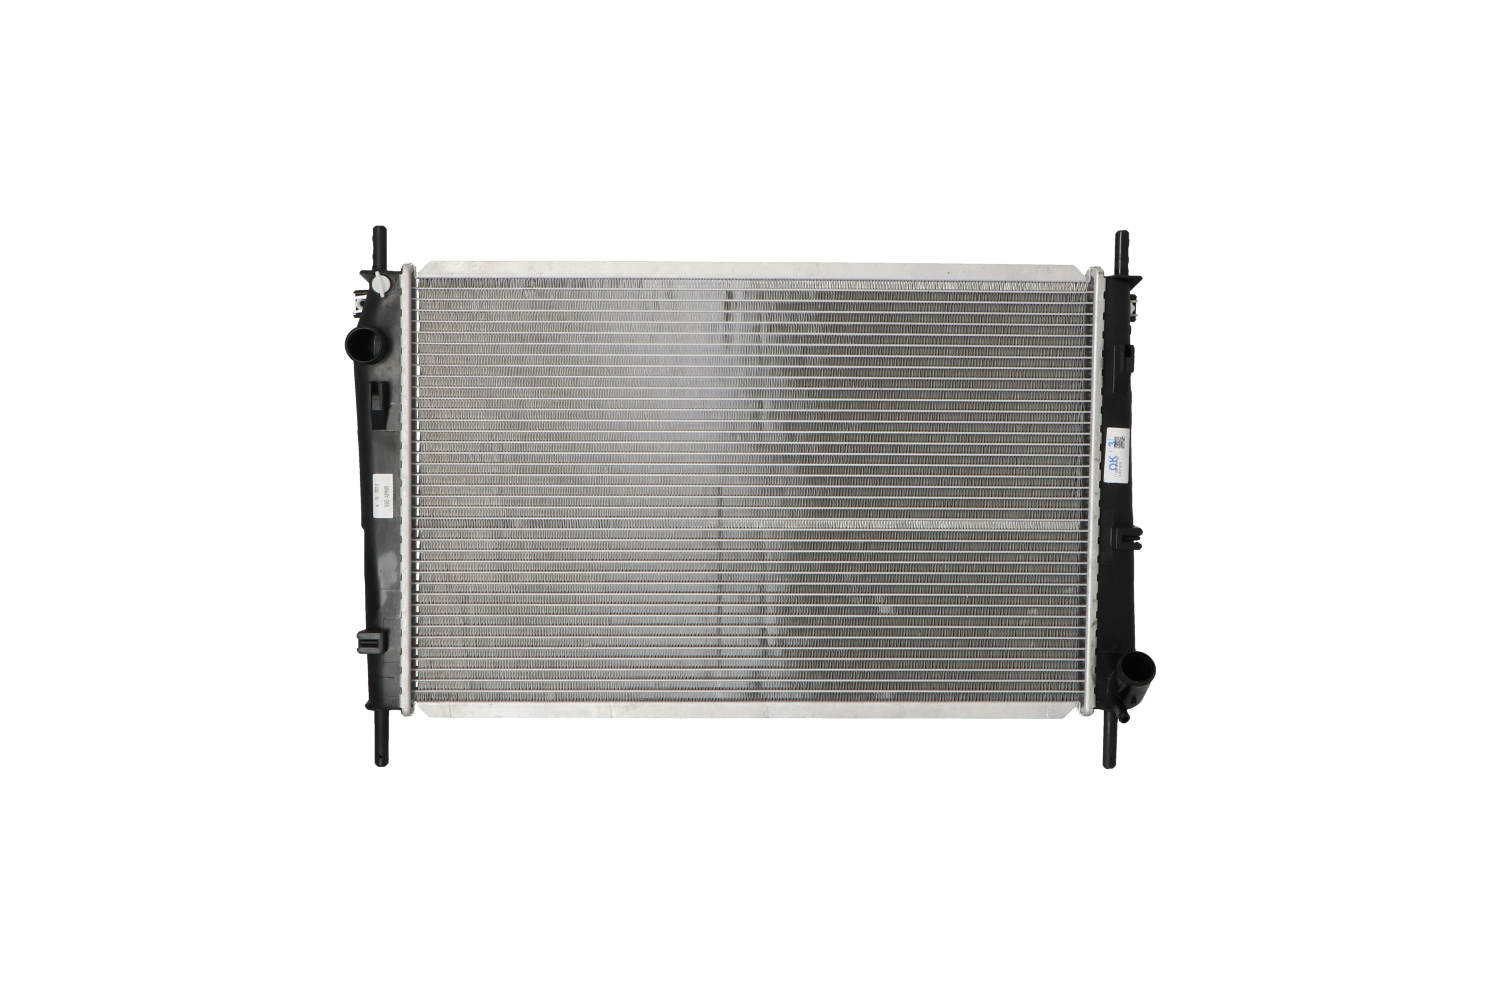 NRF 58272 Engine radiator Aluminium, 616 x 386 x 27 mm, with mounting parts, Brazed cooling fins